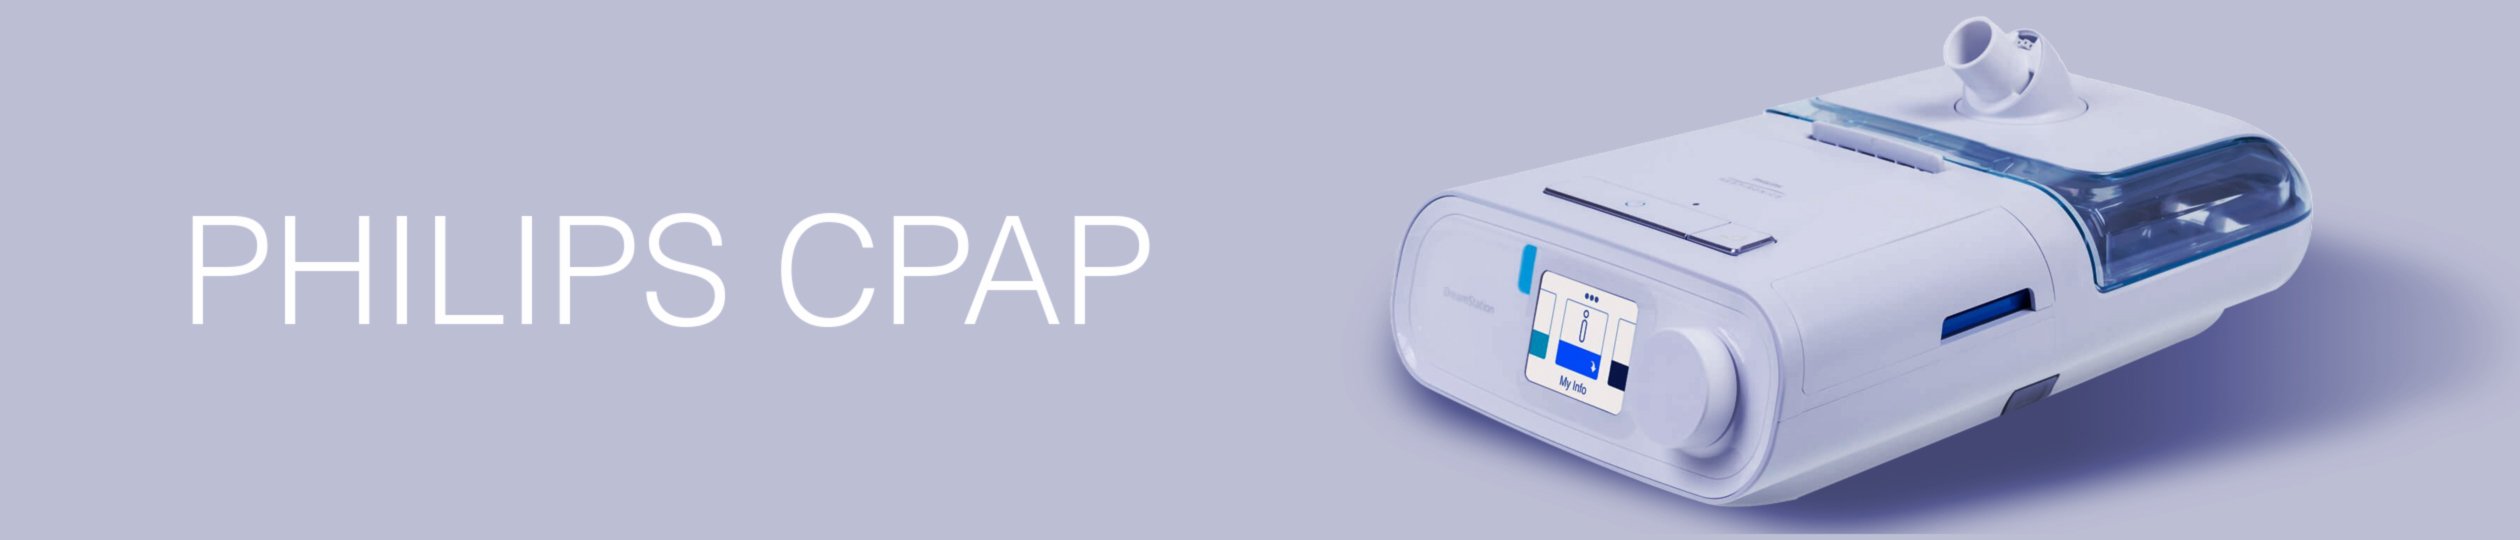 Philips CPAP related image